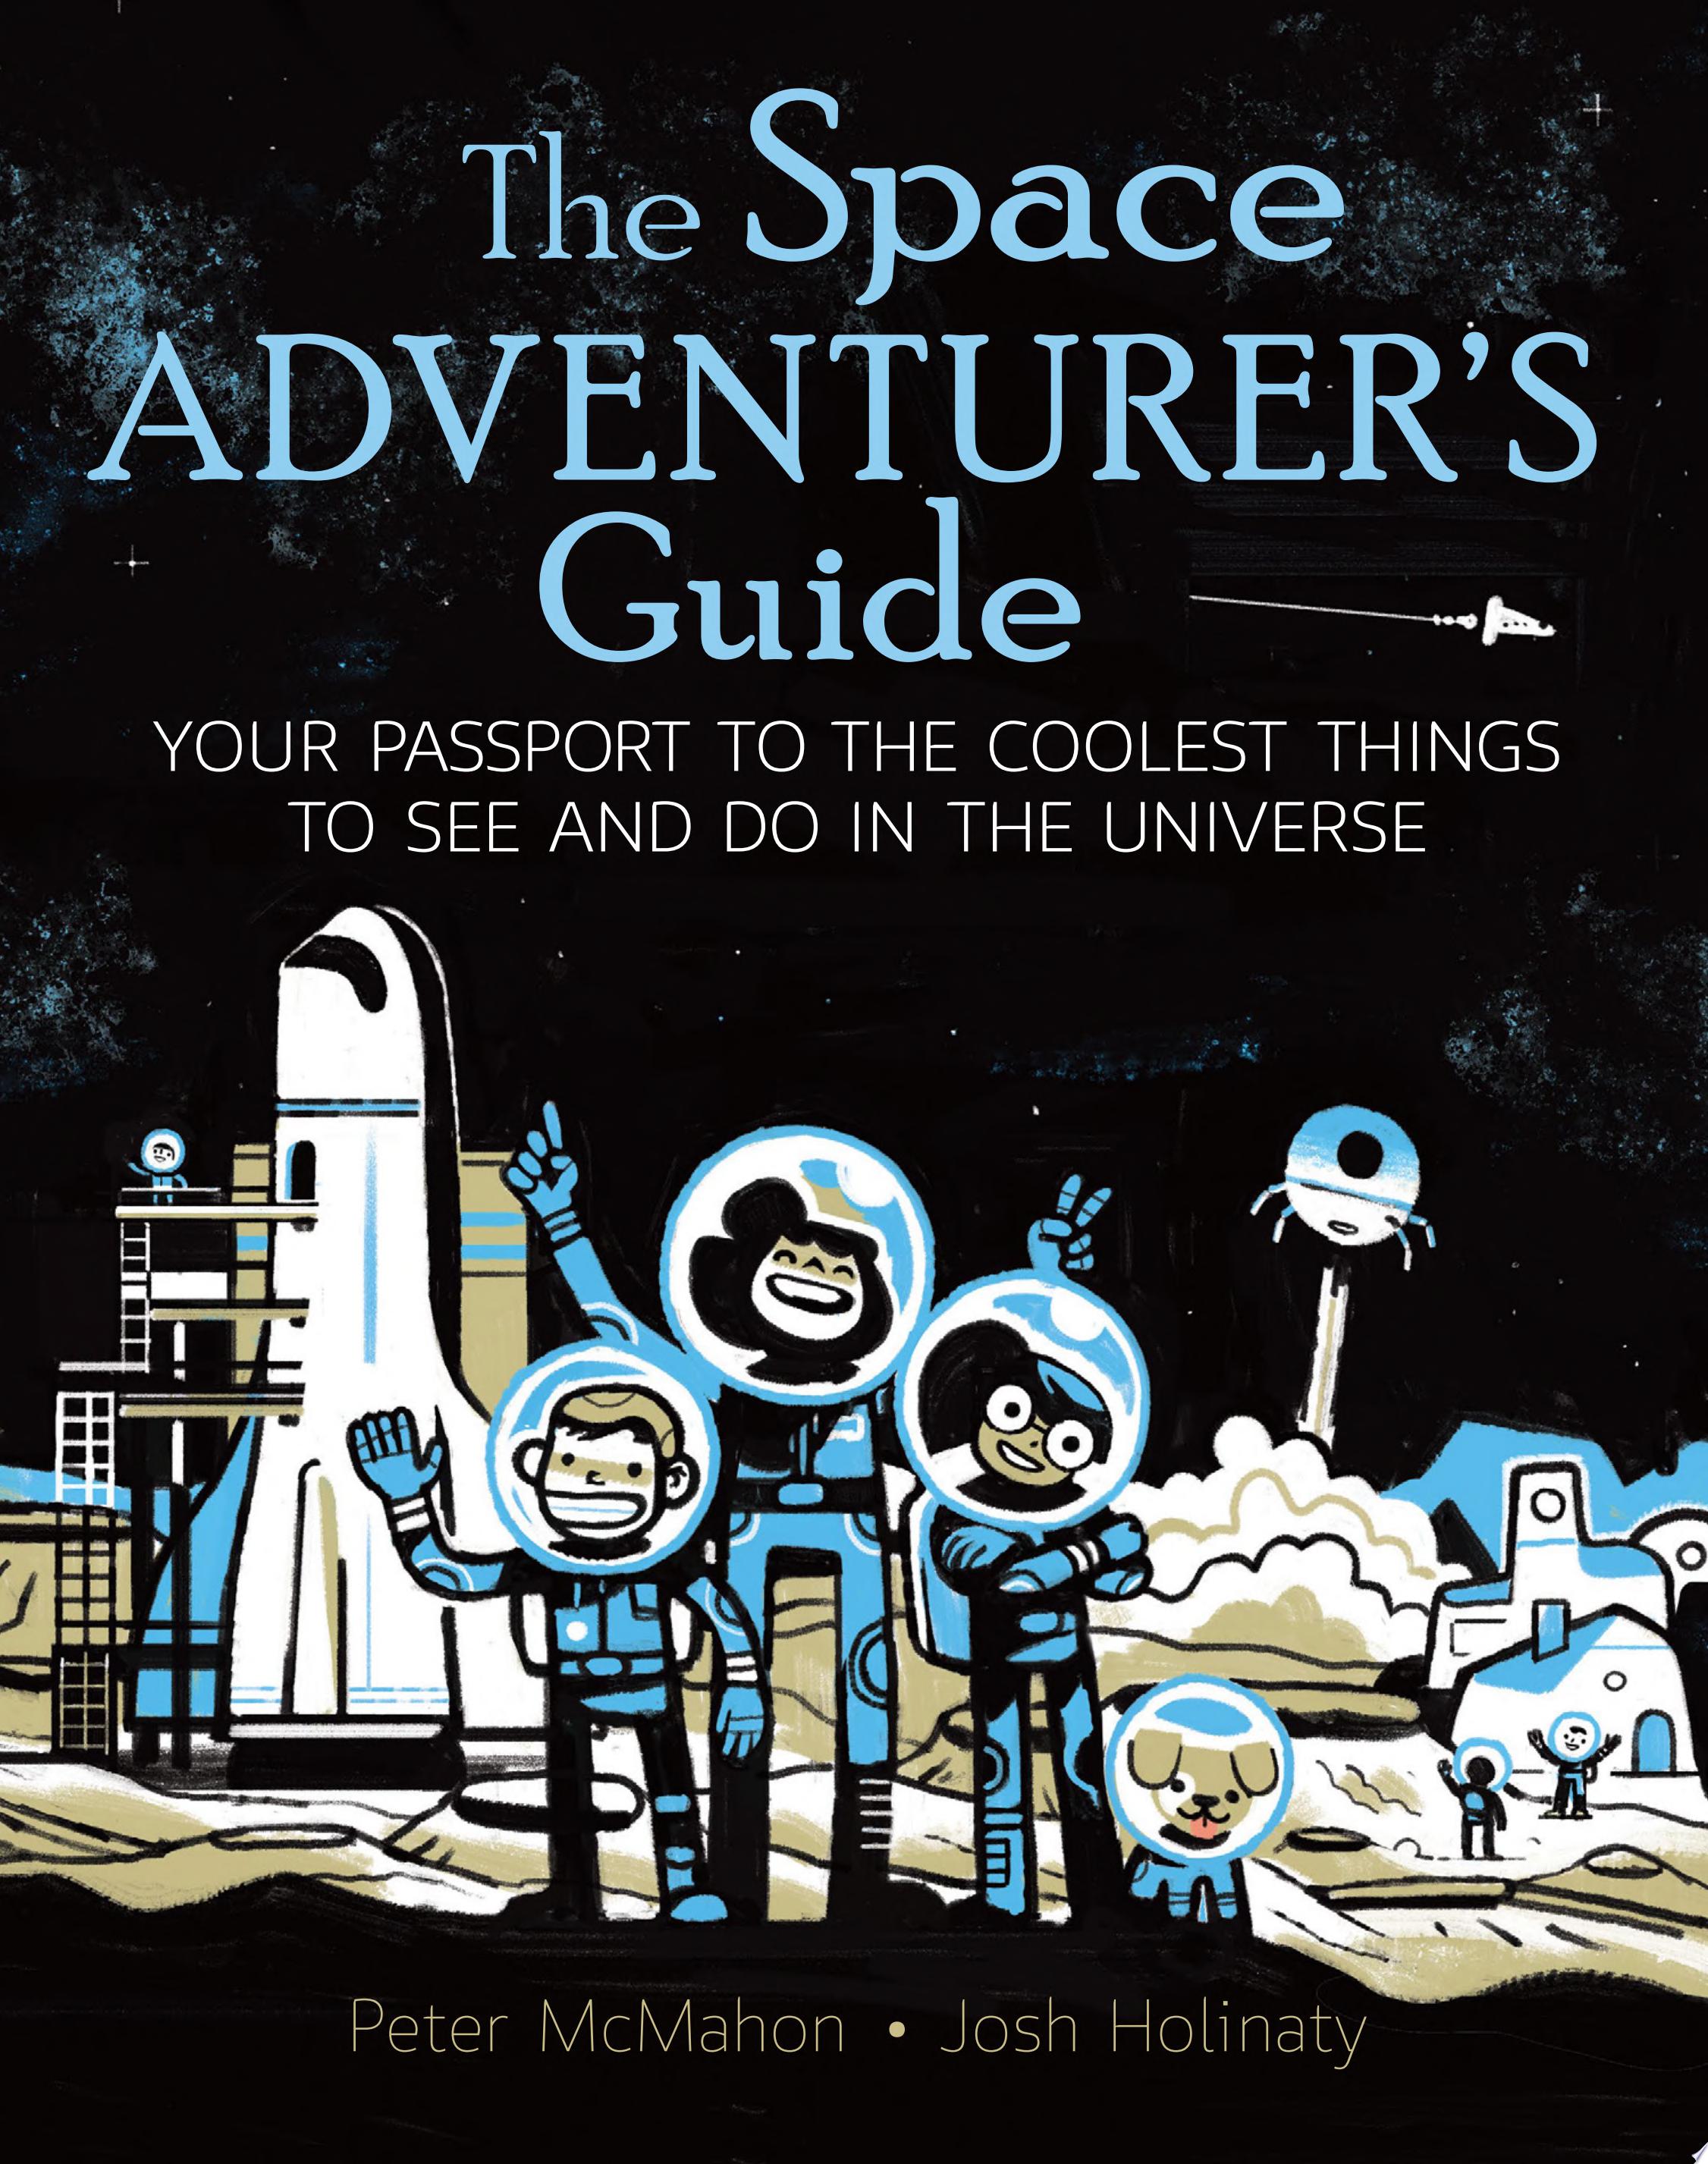 Image for "The Space Adventurer's Guide"